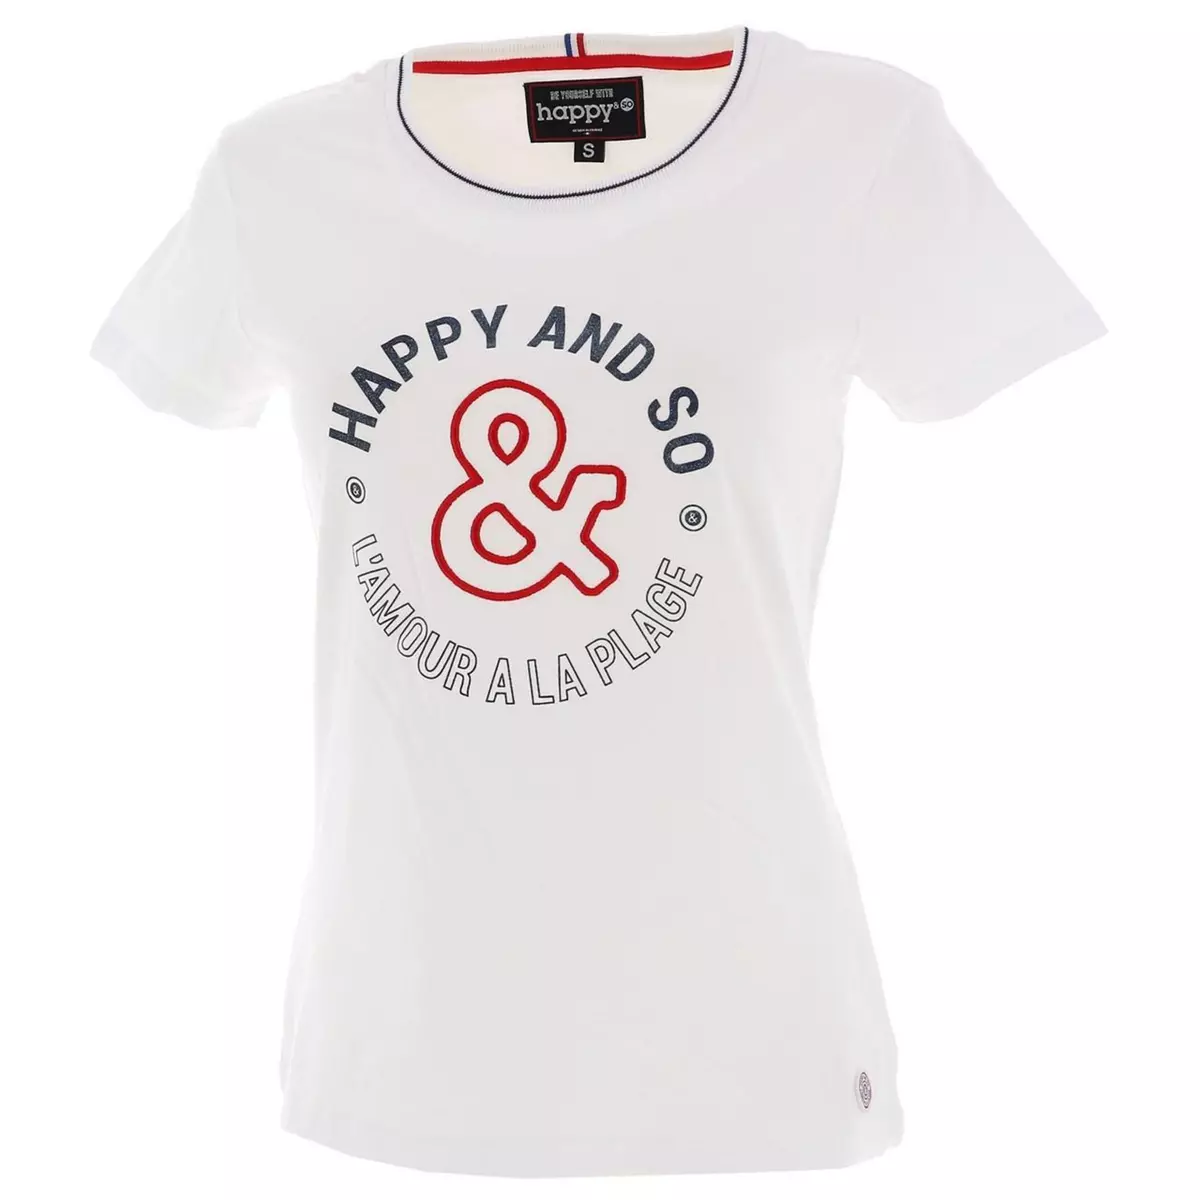 HAPPY AND SO Tee shirt manches courtes Happy and so Marin wht mc tee lady  95305